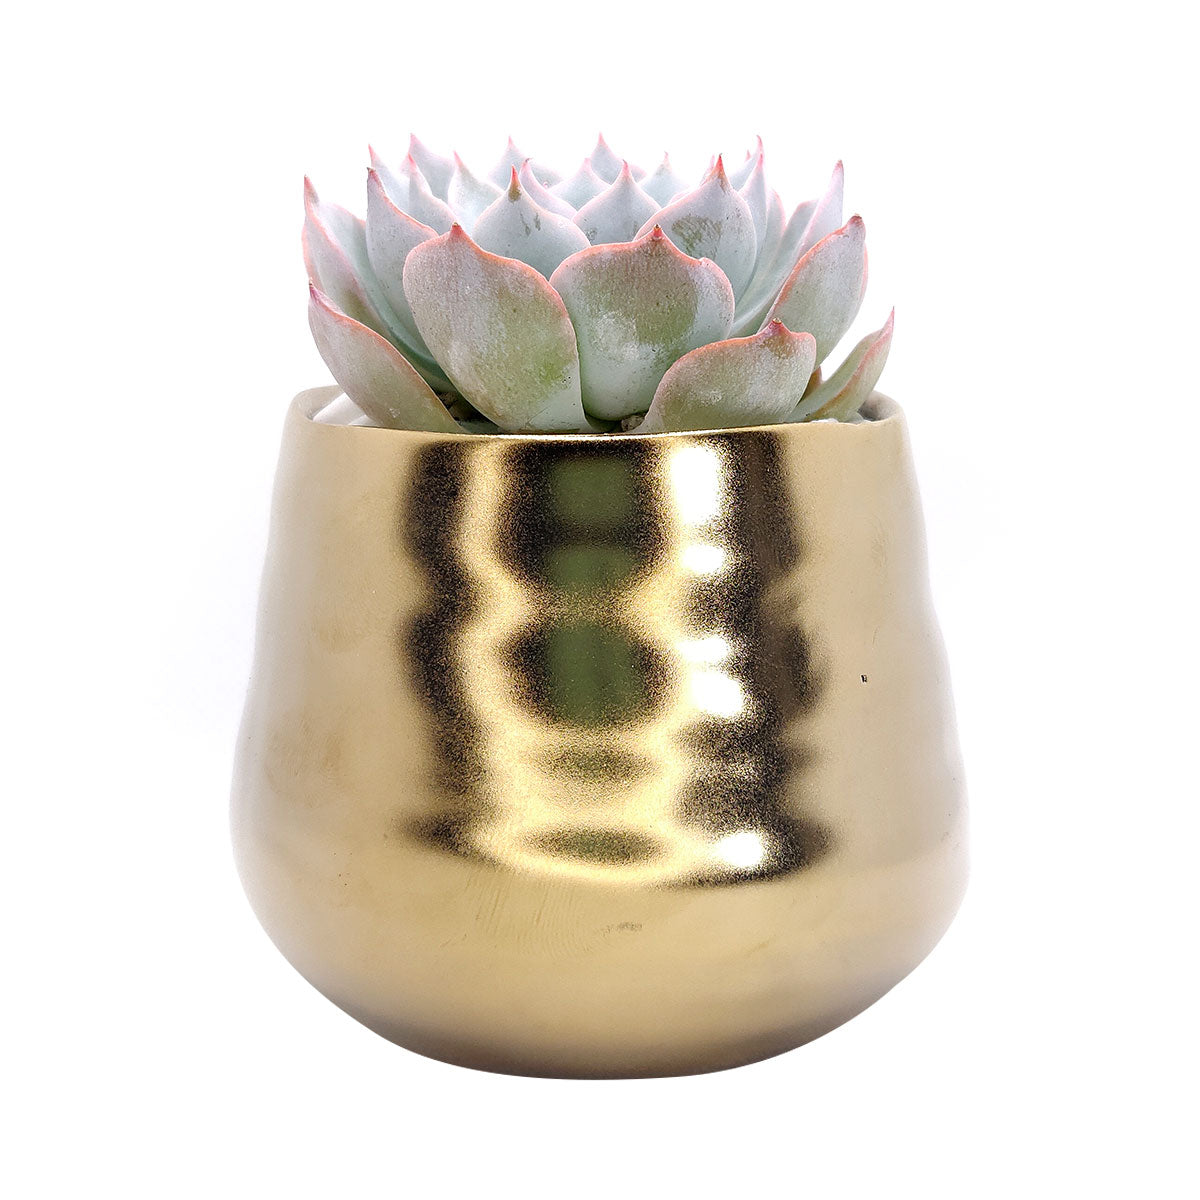 Matte Gold Ceramic Pot for sale, Succulent pot with rustic style for home decor, Small pot for succulent and cactus plant, Ceramic flower pot for sale